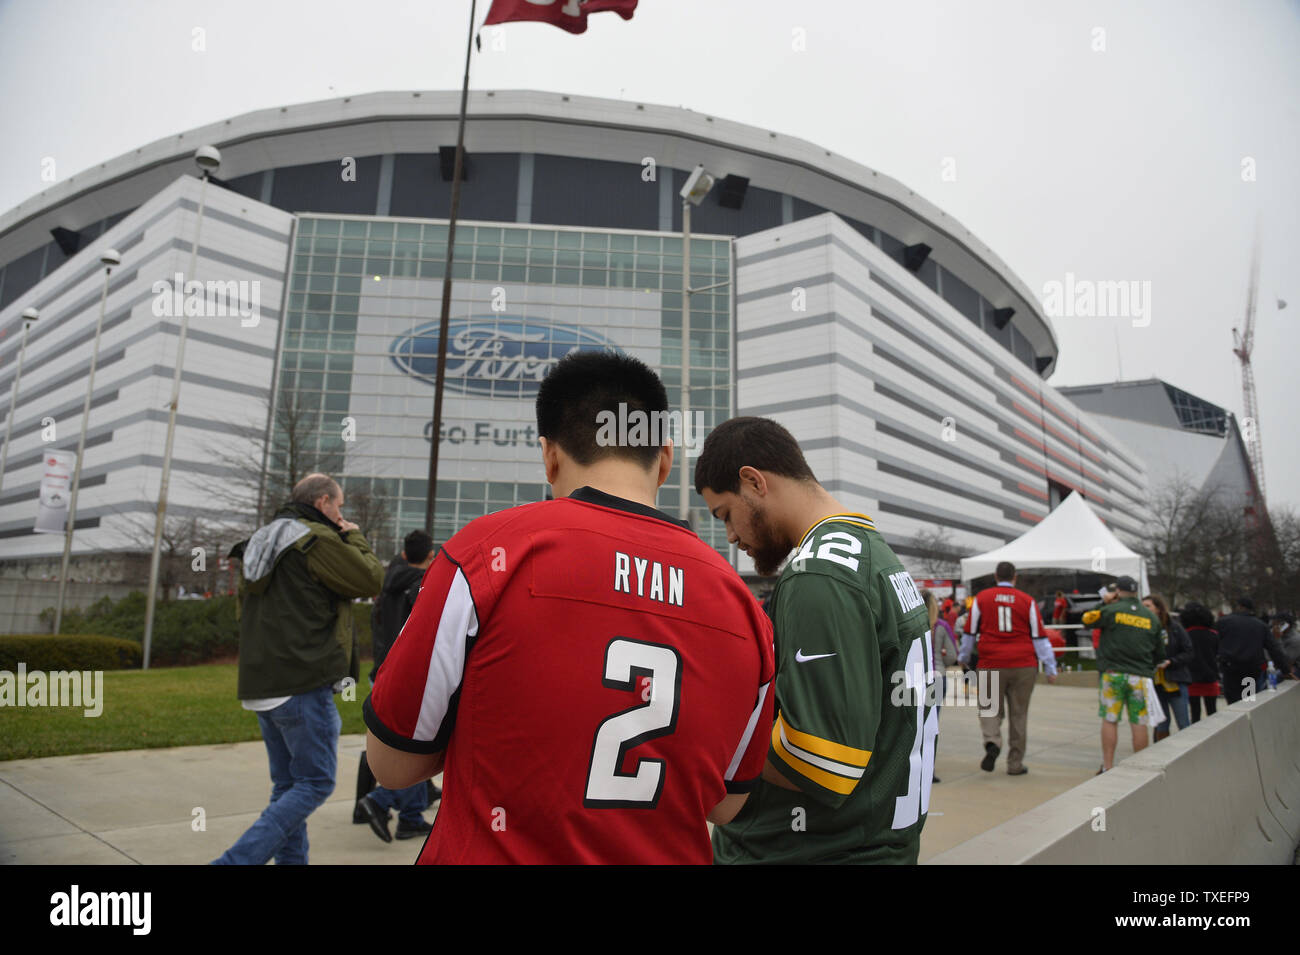 Page 3 - Green Bay Packers Fans High Resolution Stock Photography and  Images - Alamy